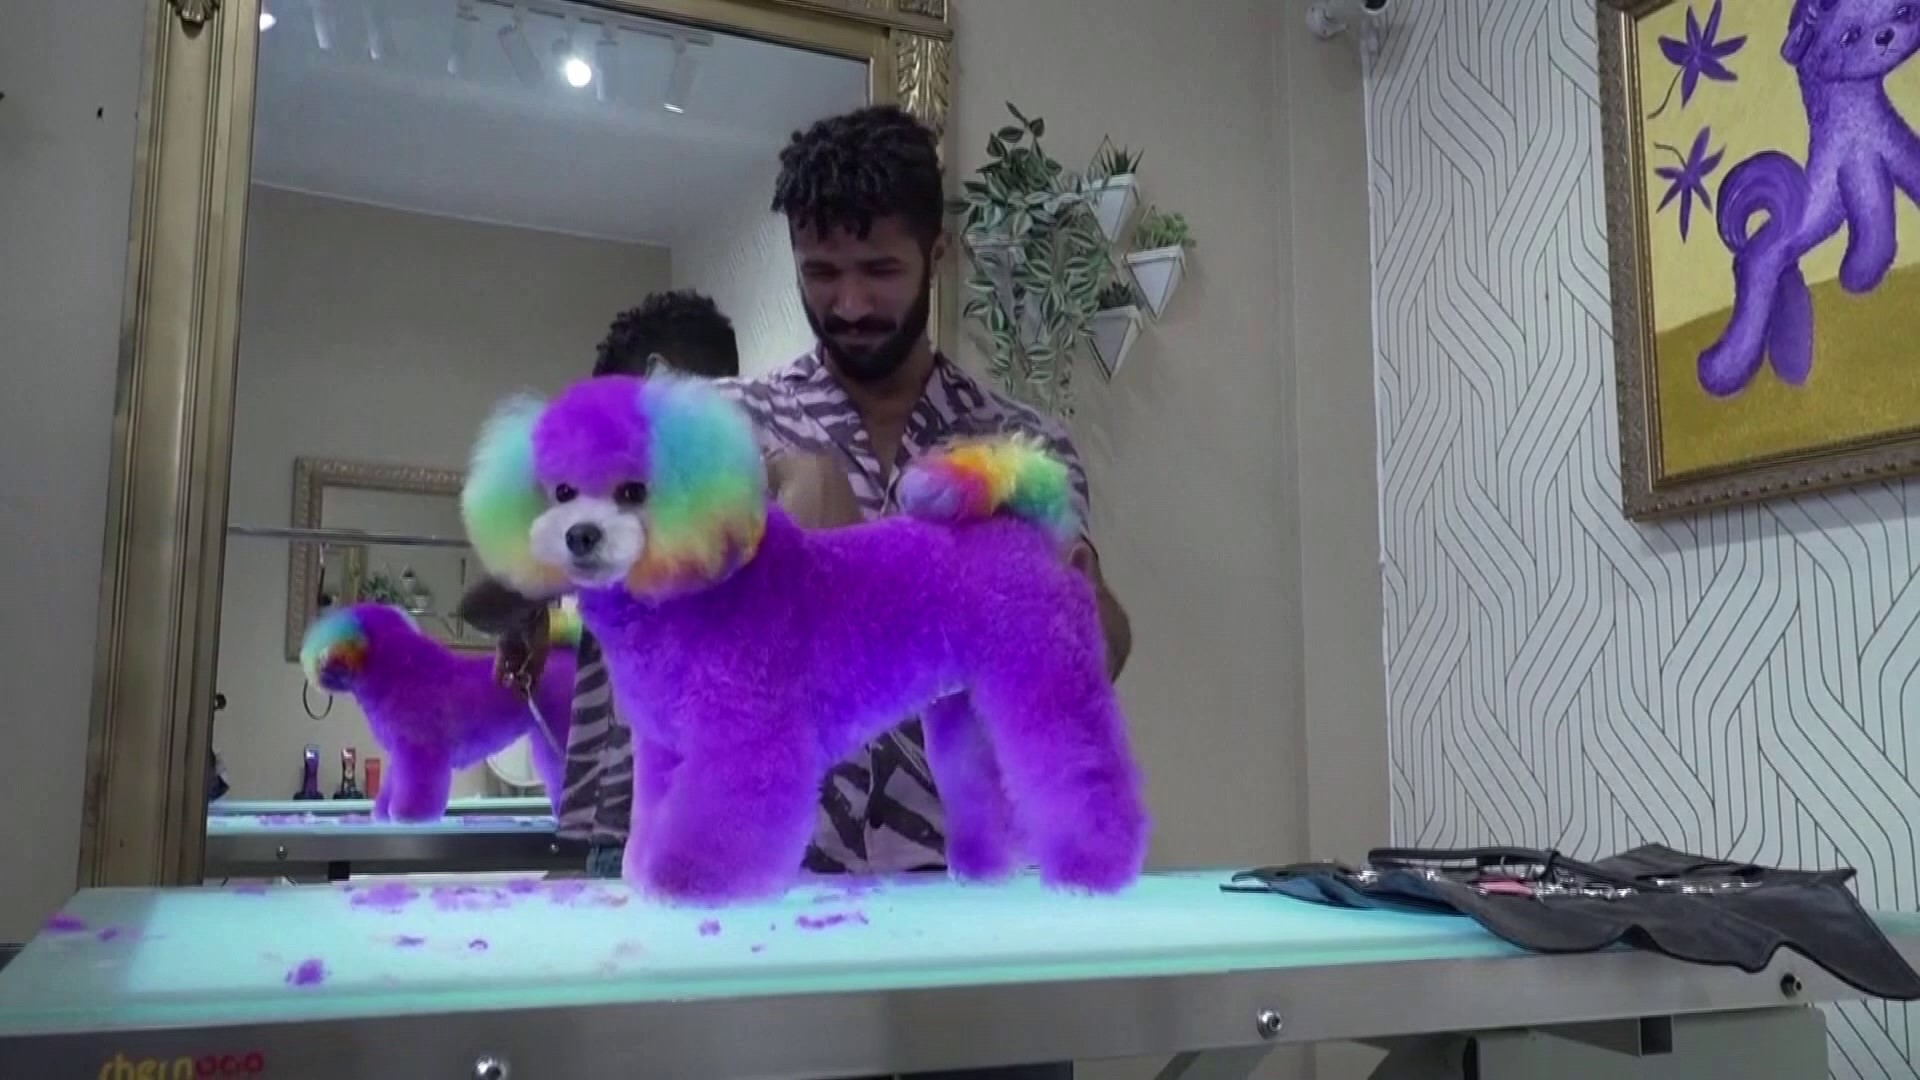 Gabriel Feitosa is a dog groomer in San Diego, California who is famous for his luxurious and colorful transformation of dogs.